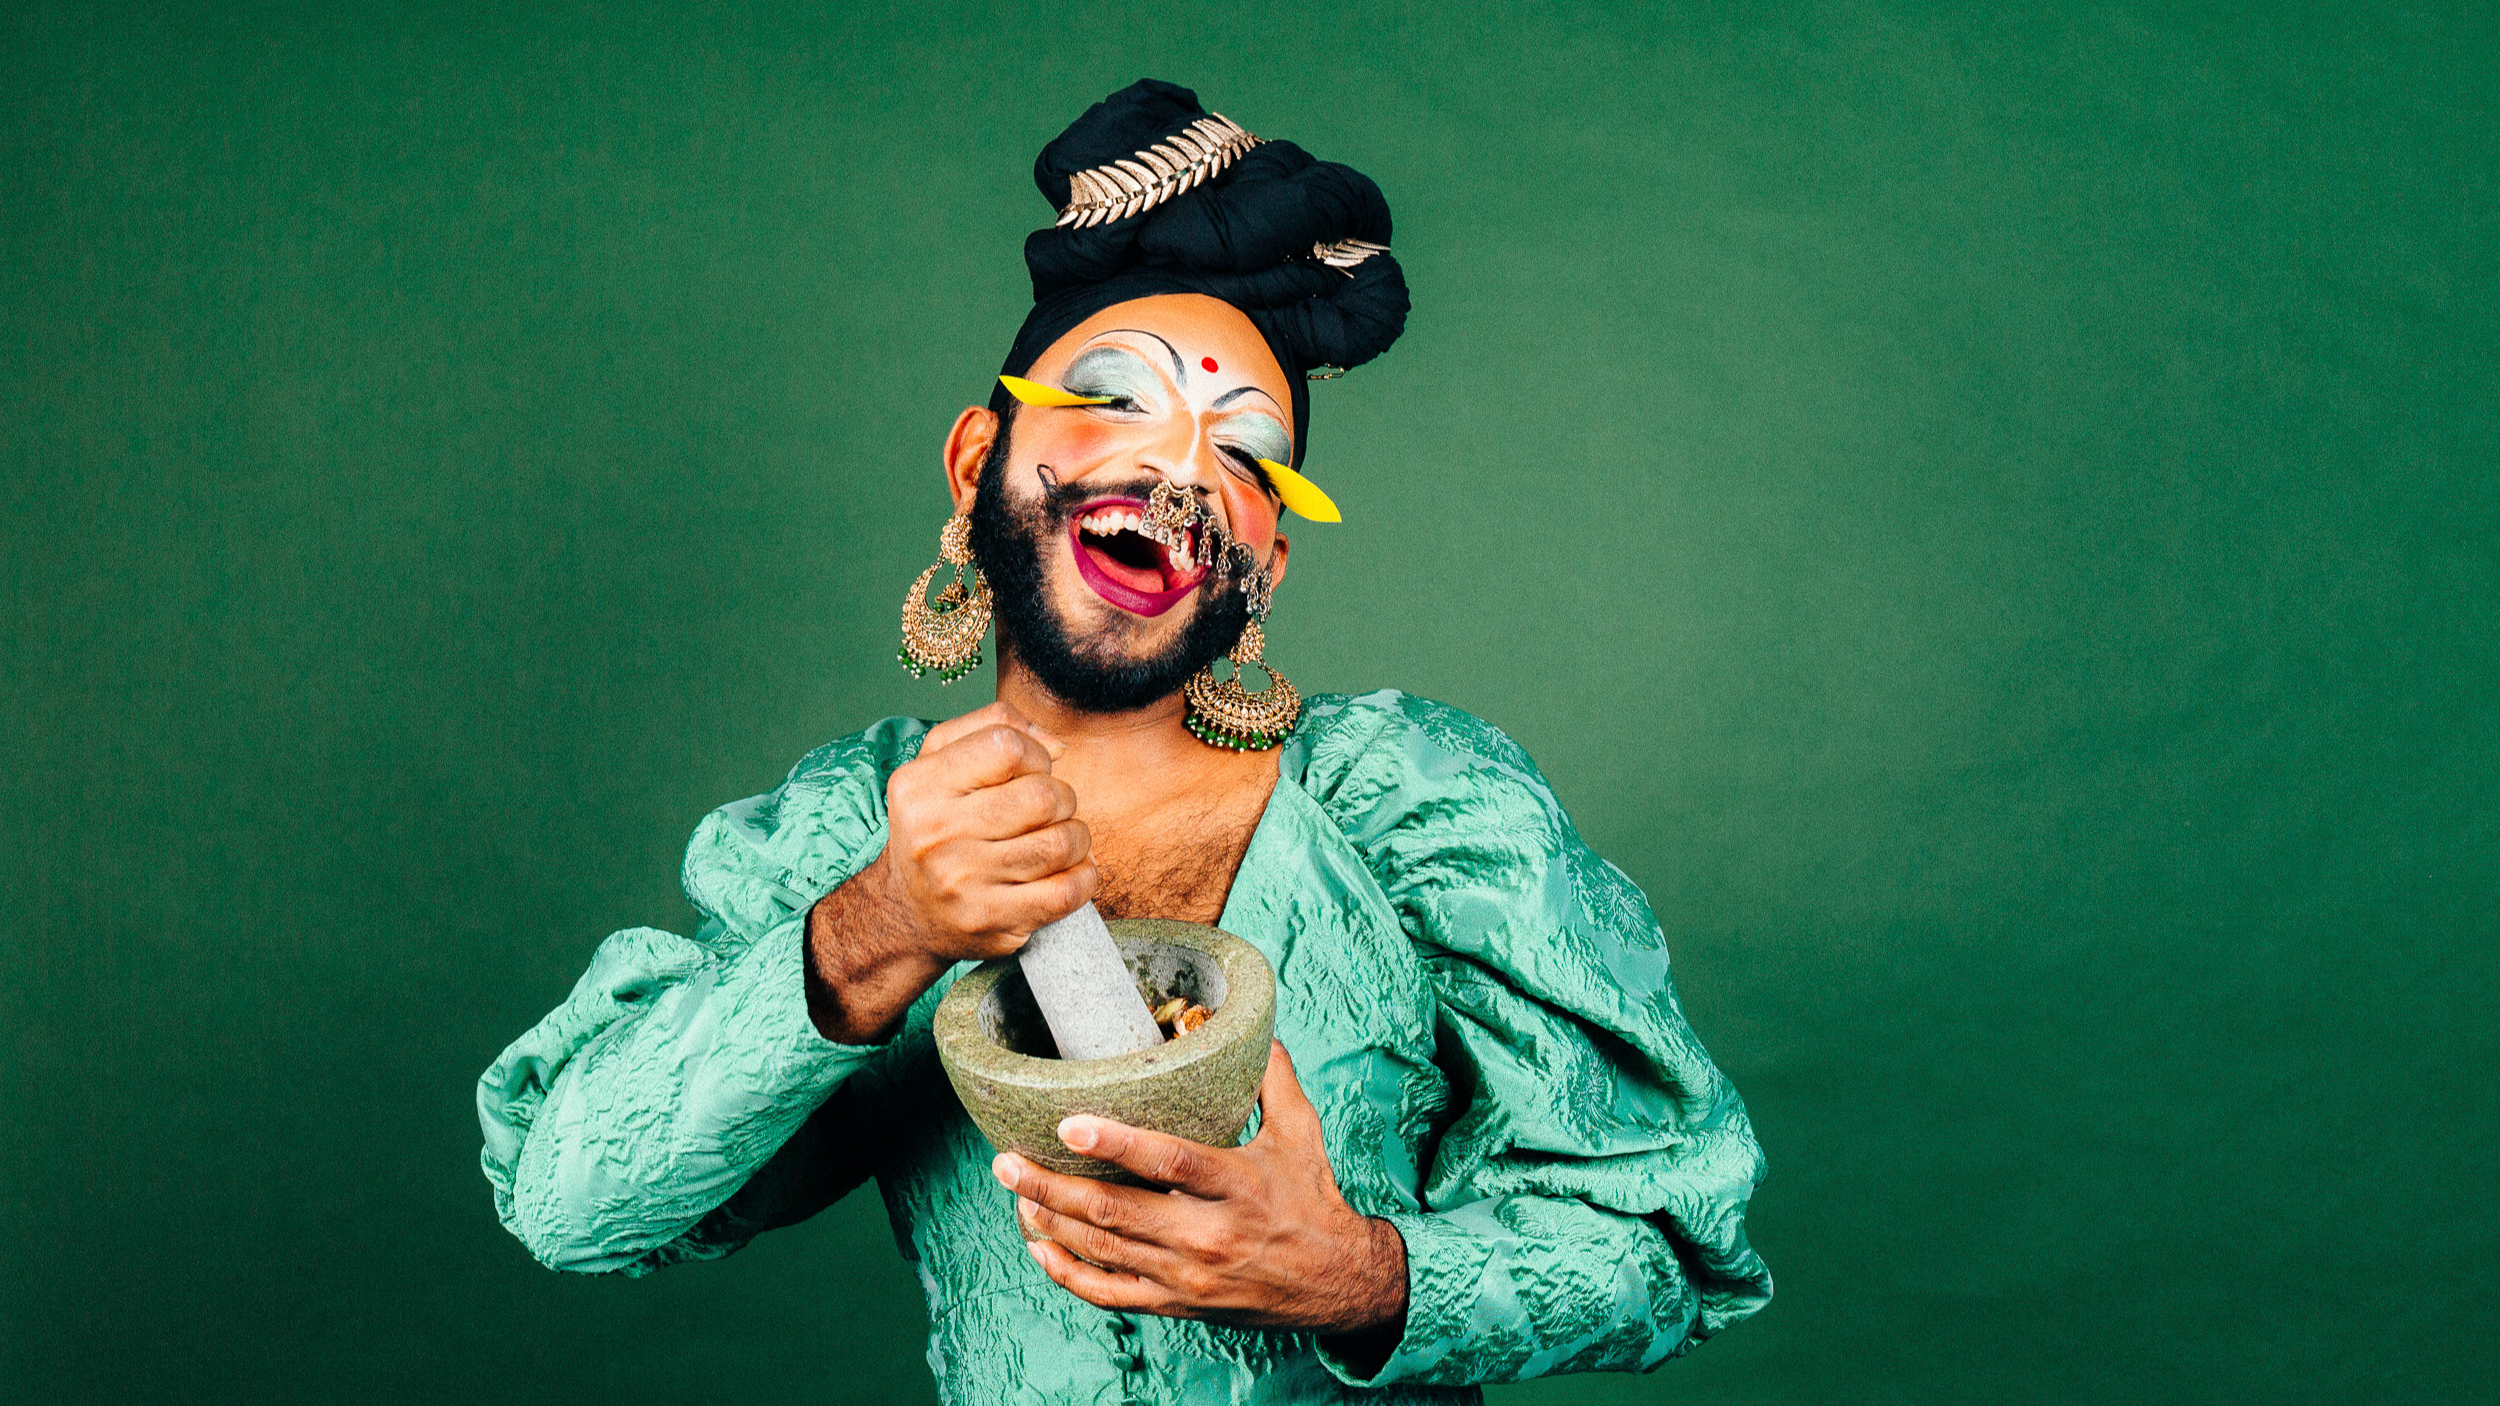 Radha, a South Asian drag performer, laughs at the camera while grinding ingredients in a mortar and pestle. They wear a turquoise satin dress, gold earrings, yellow false lashes, silver eyeshadow and a black turban.